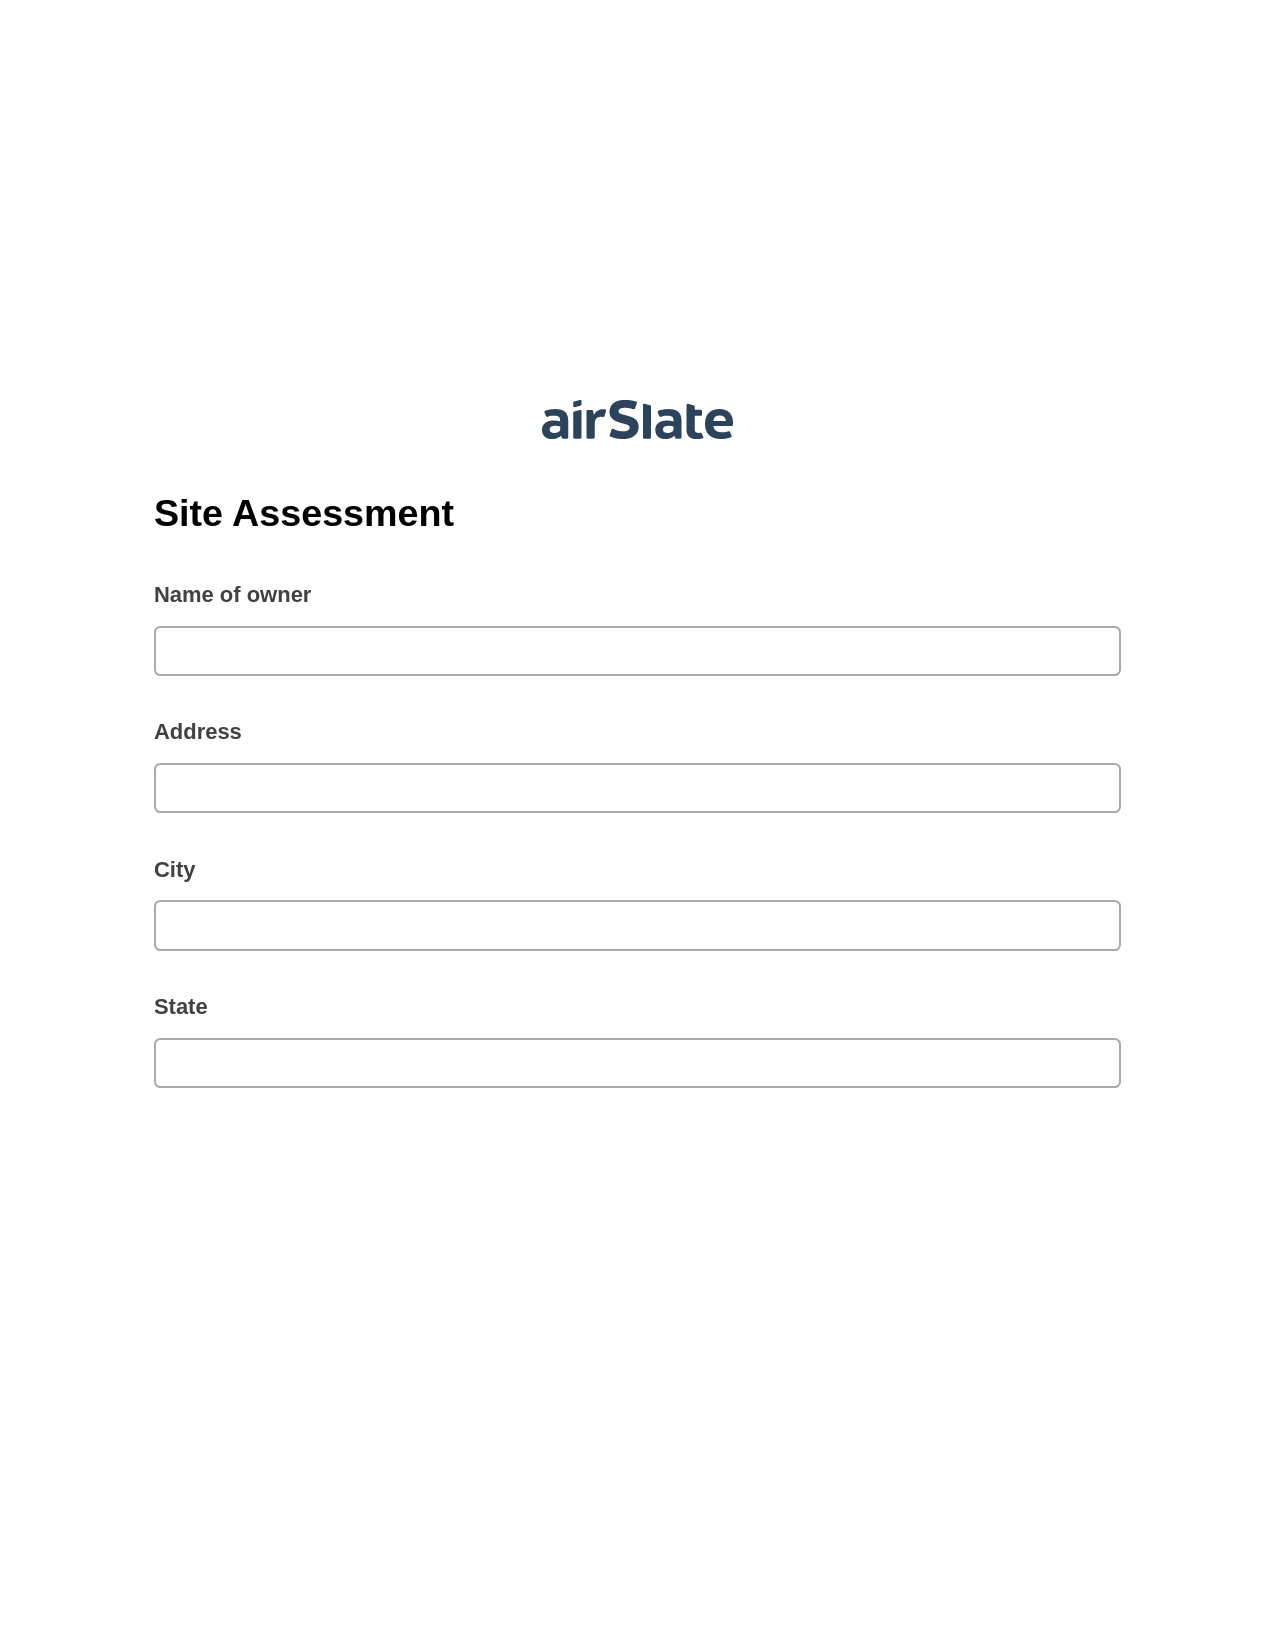 Site Assessment Pre-fill from CSV File Dropdown Options Bot, Add Tags to Slate Bot, Text Message Notification Postfinish Bot